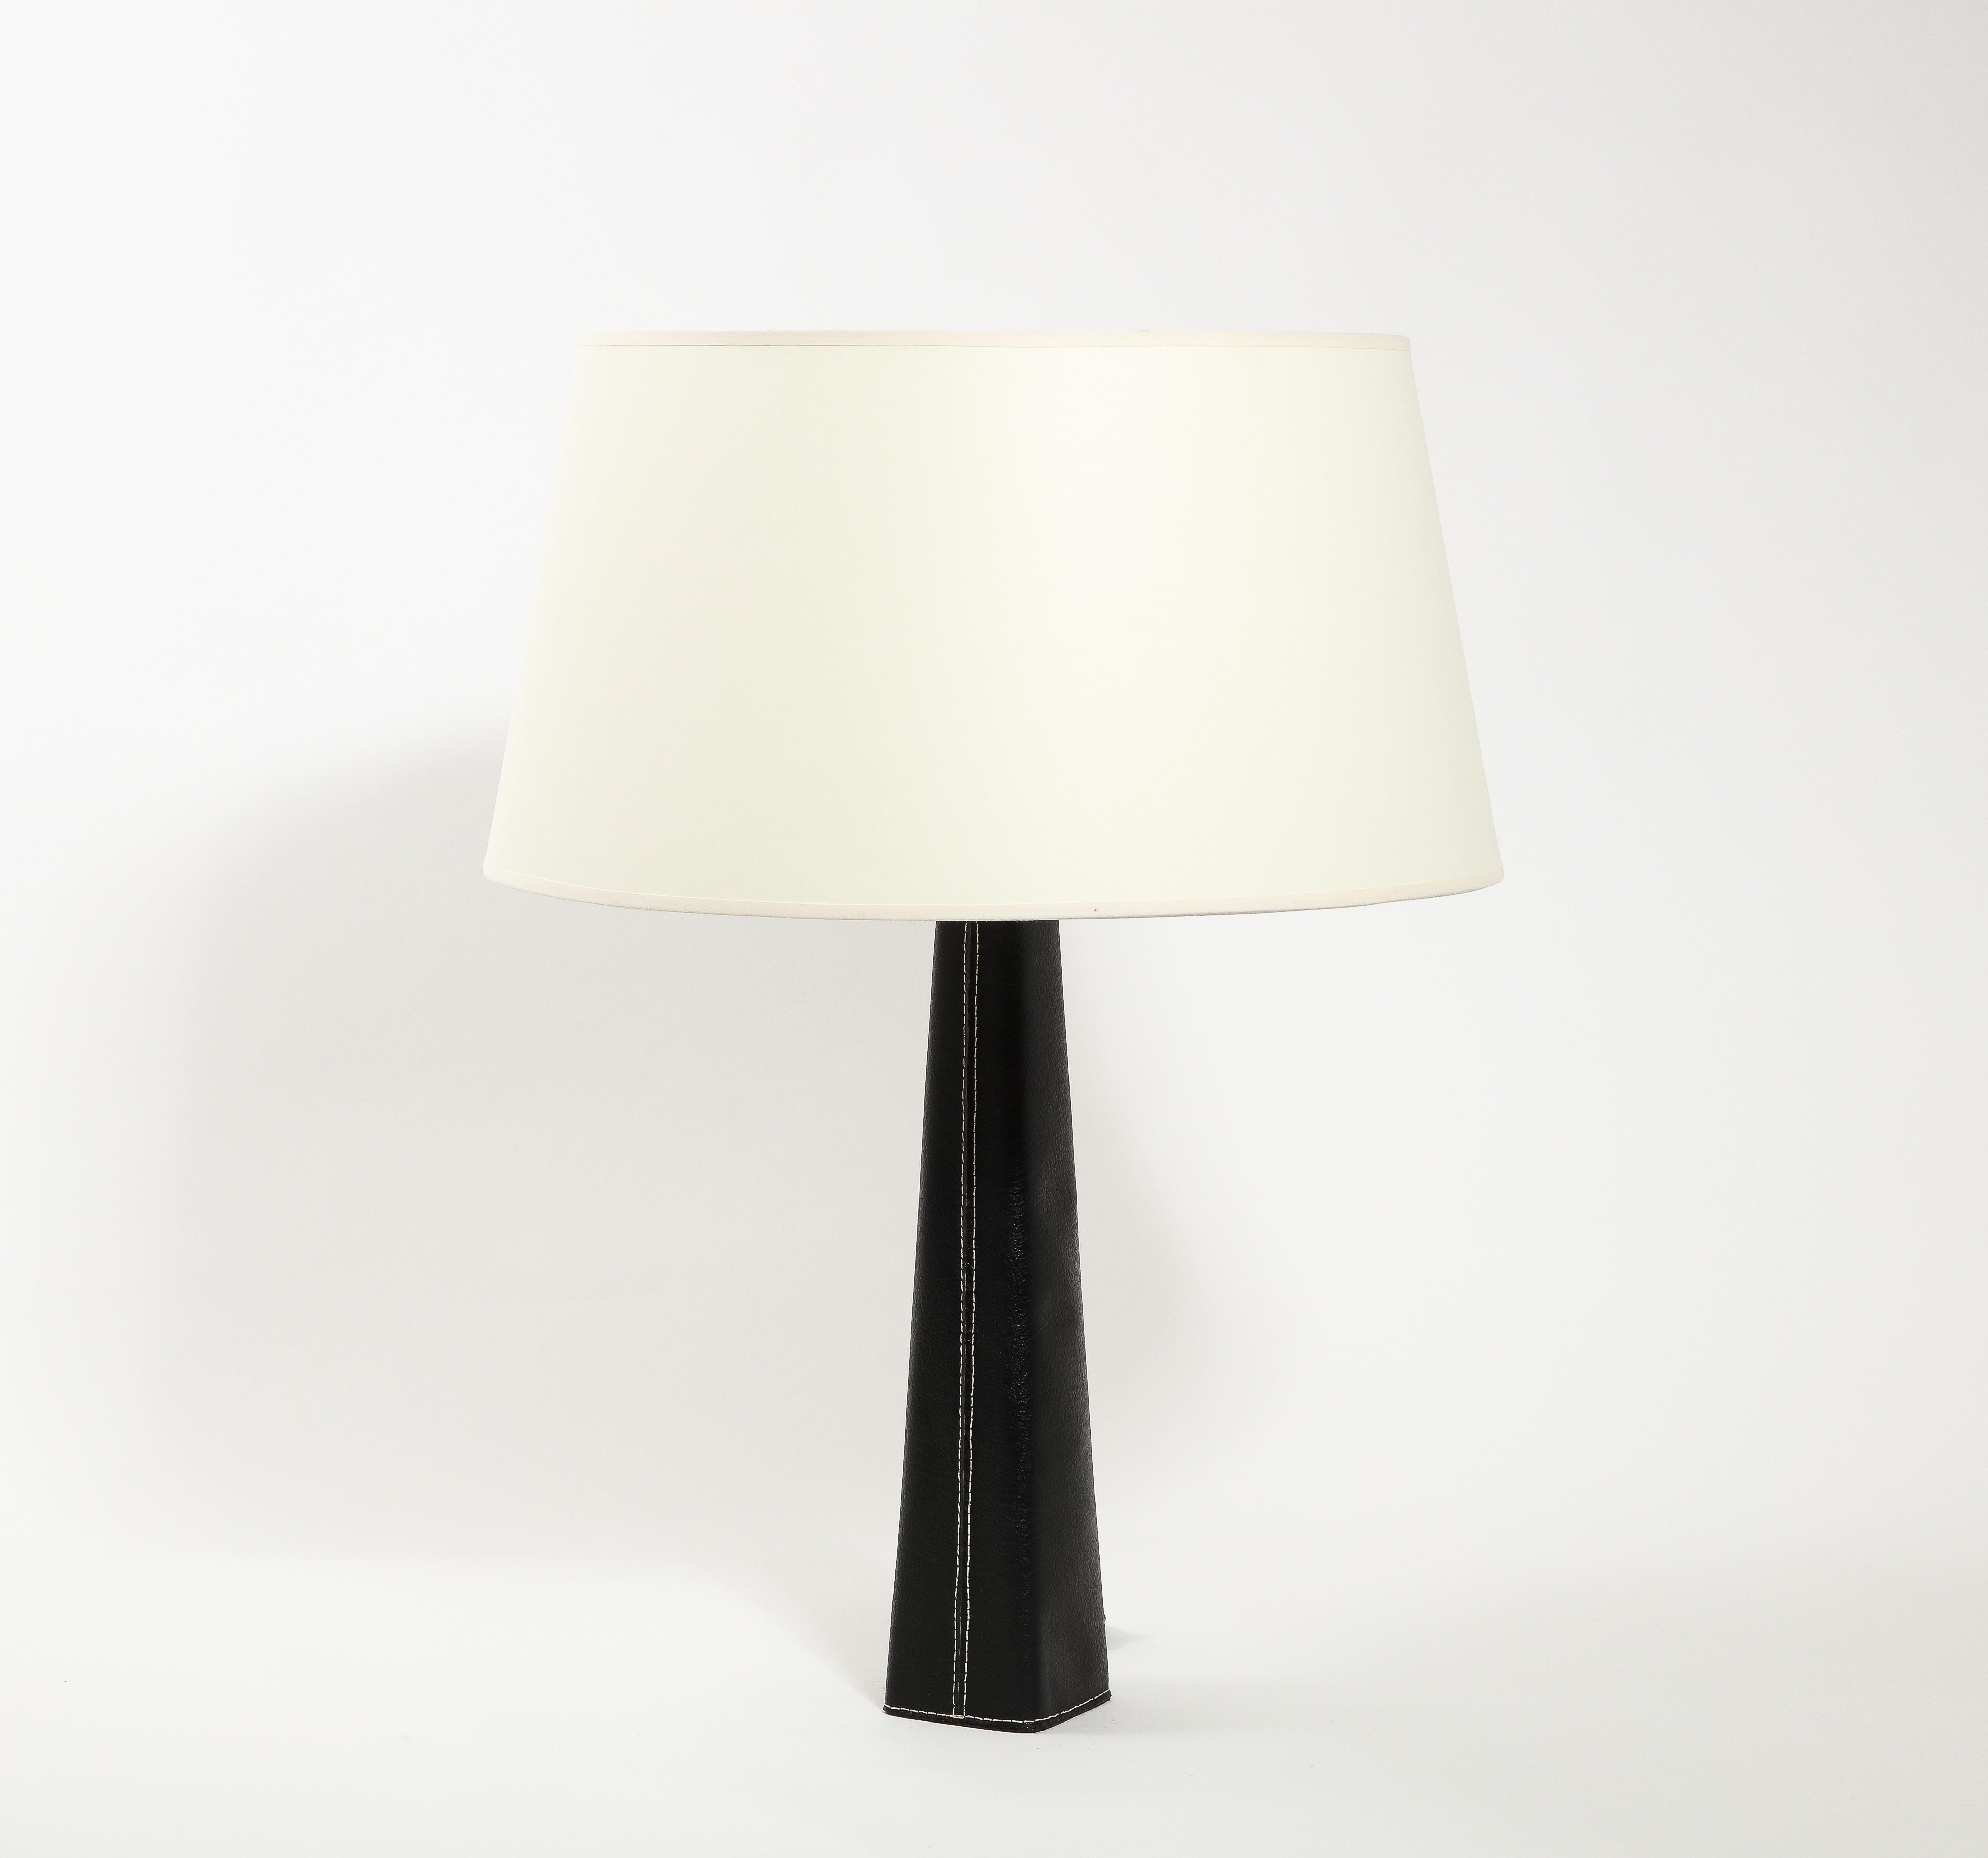 Learthe Covered Table Lamp by Metalarte, Spain 1970's For Sale 4